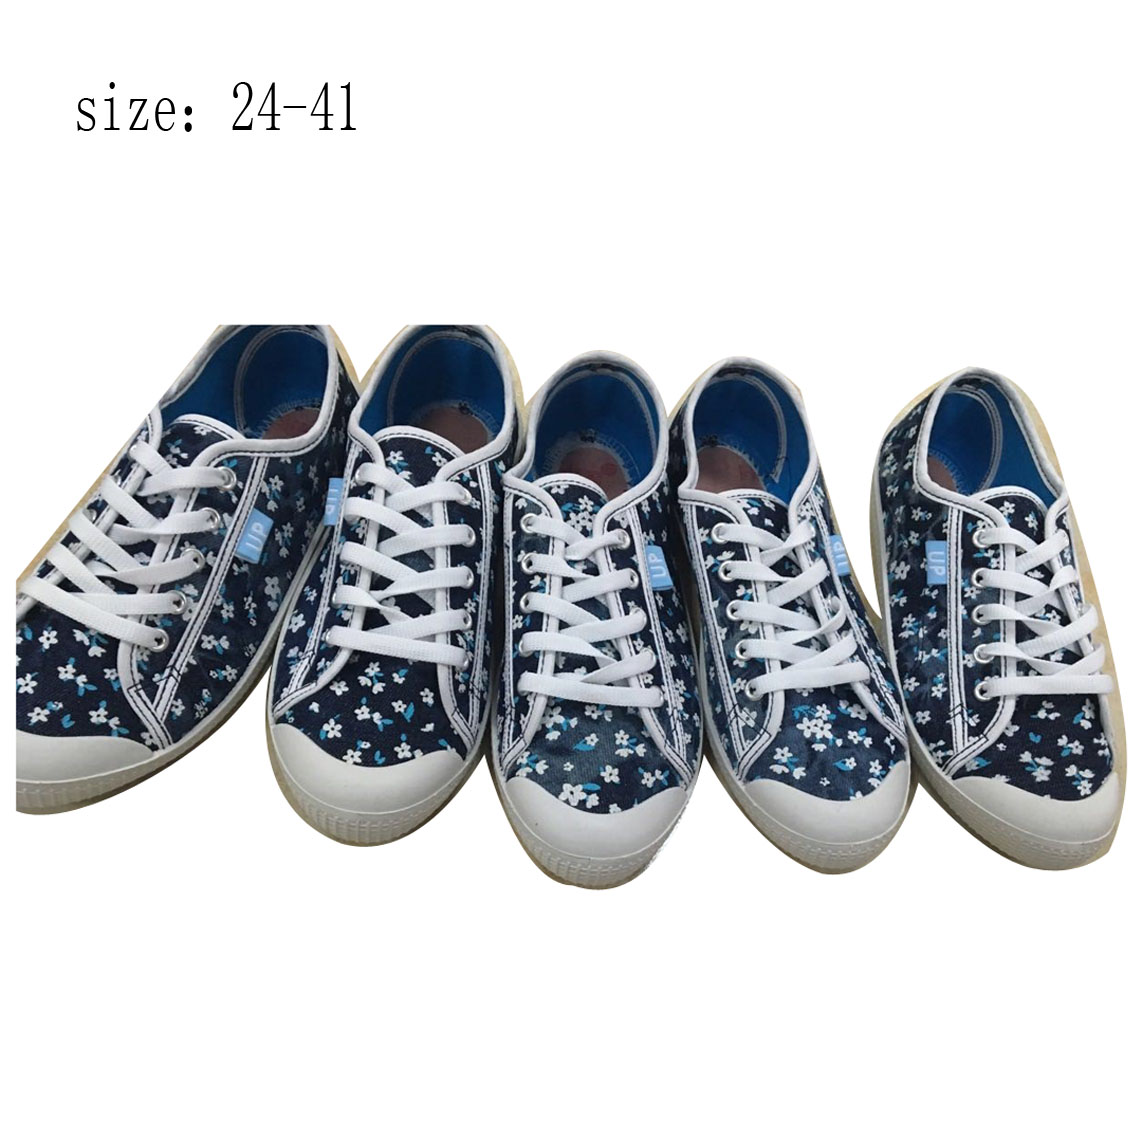 New design women casual shoes canvas shoes (HP19517-3) 1. ITEM...